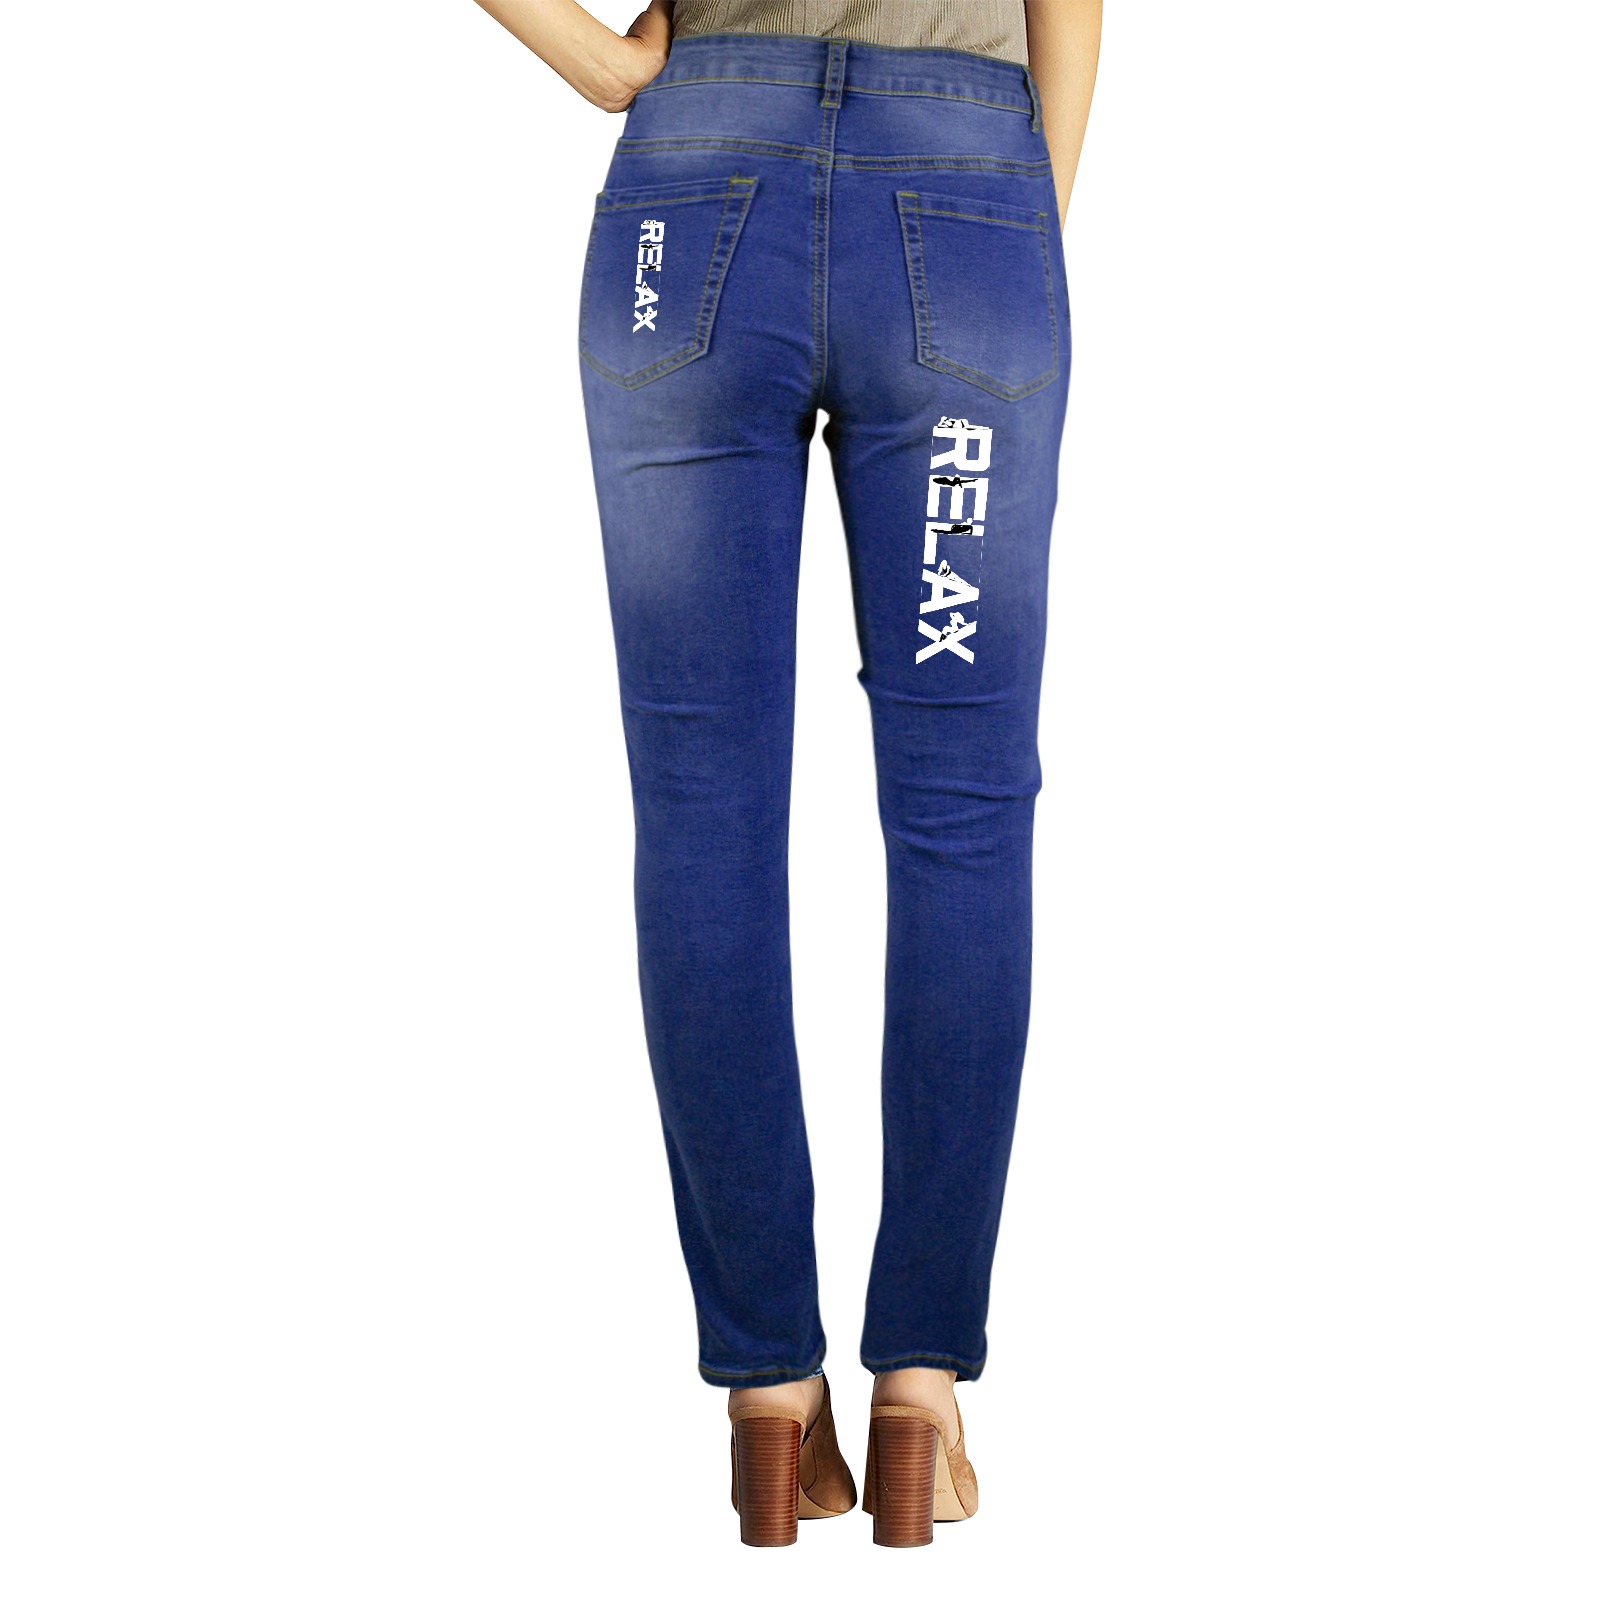 Relax white text and silhouettes of relaxing women Women's Jeans (Front&Back Printing)